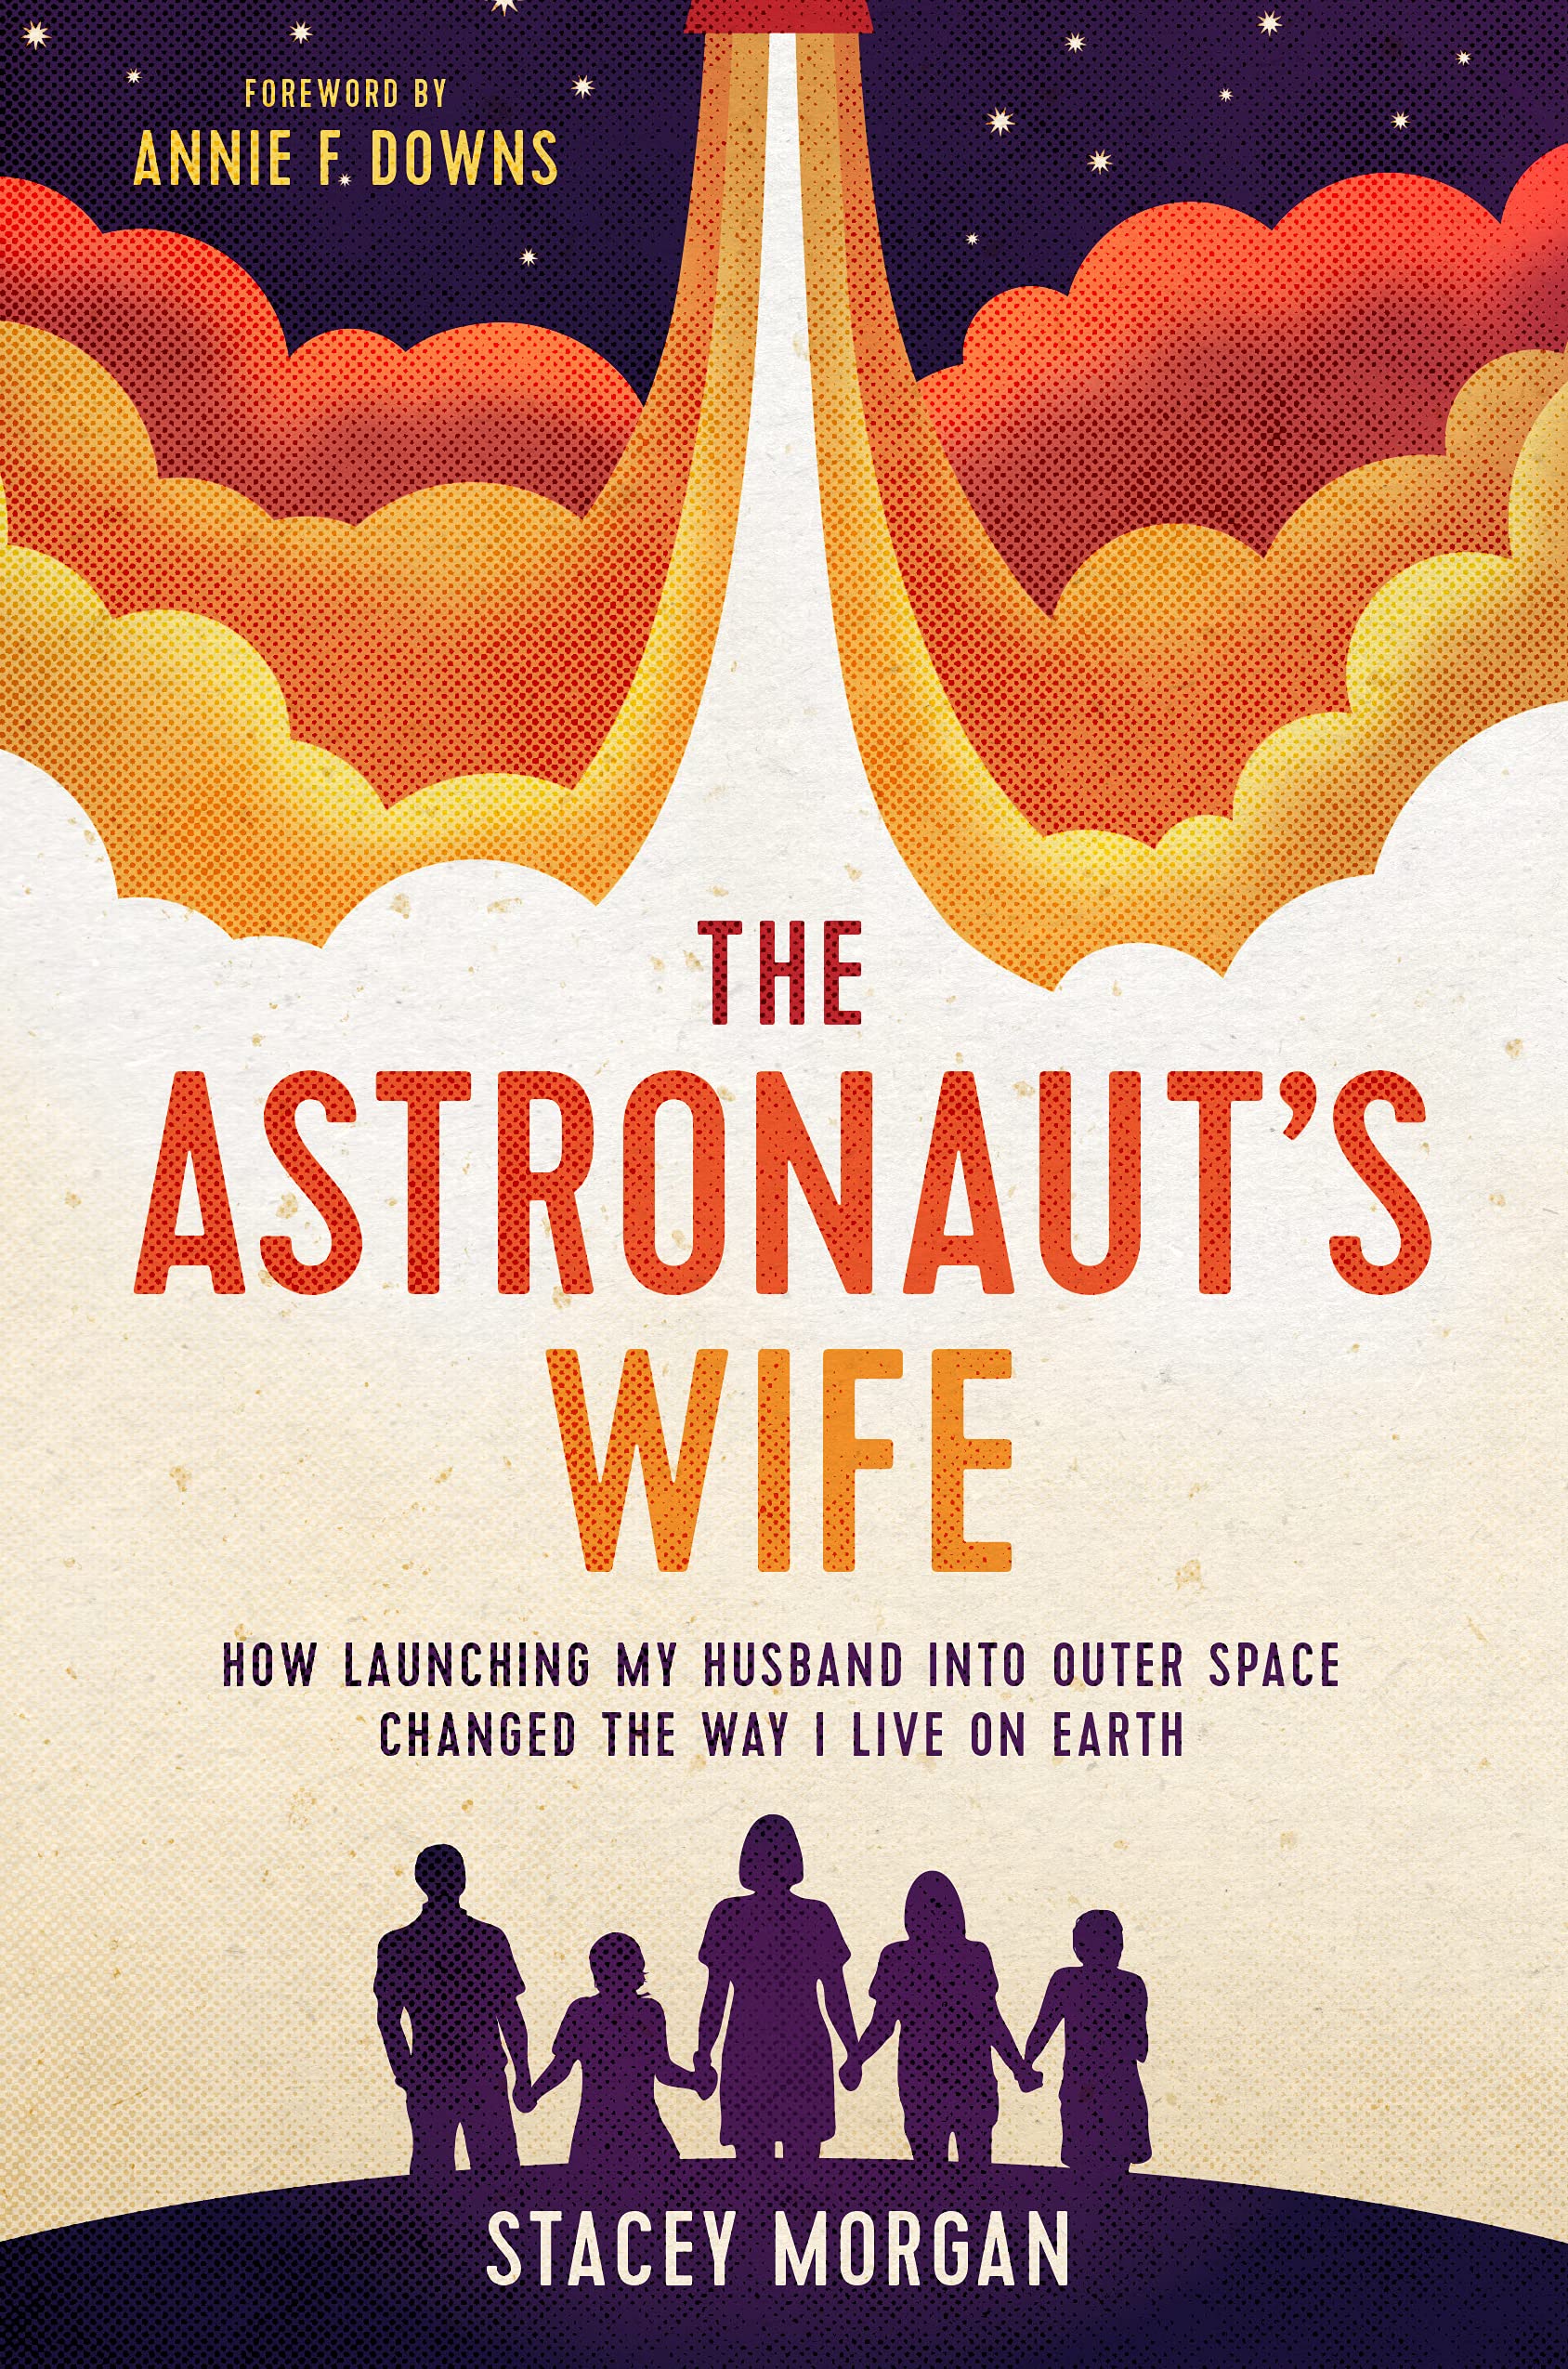 The Astronaut's Wife: How Launching My Husband Into Outer Space Changed the Way I Live on Earth - SureShot Books Publishing LLC